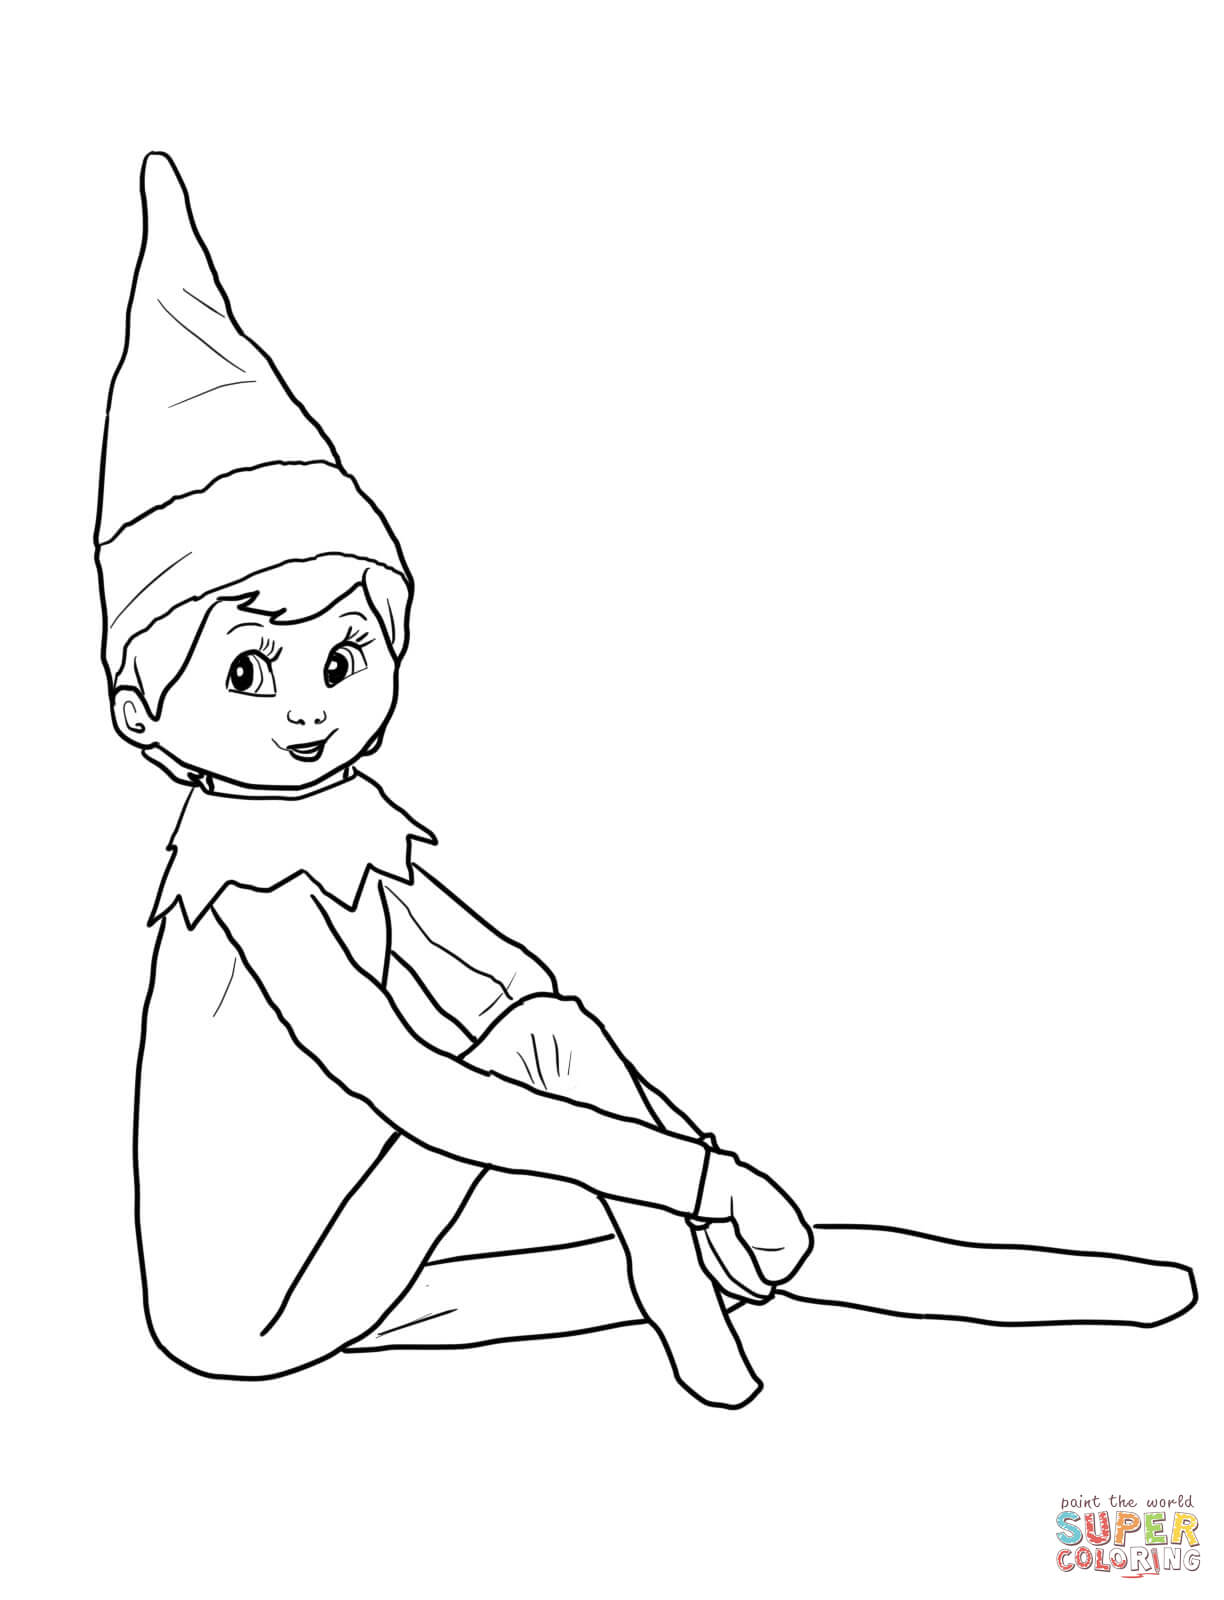 Elf  black and white elf on the shelf coloring pages free coloring pages clip art